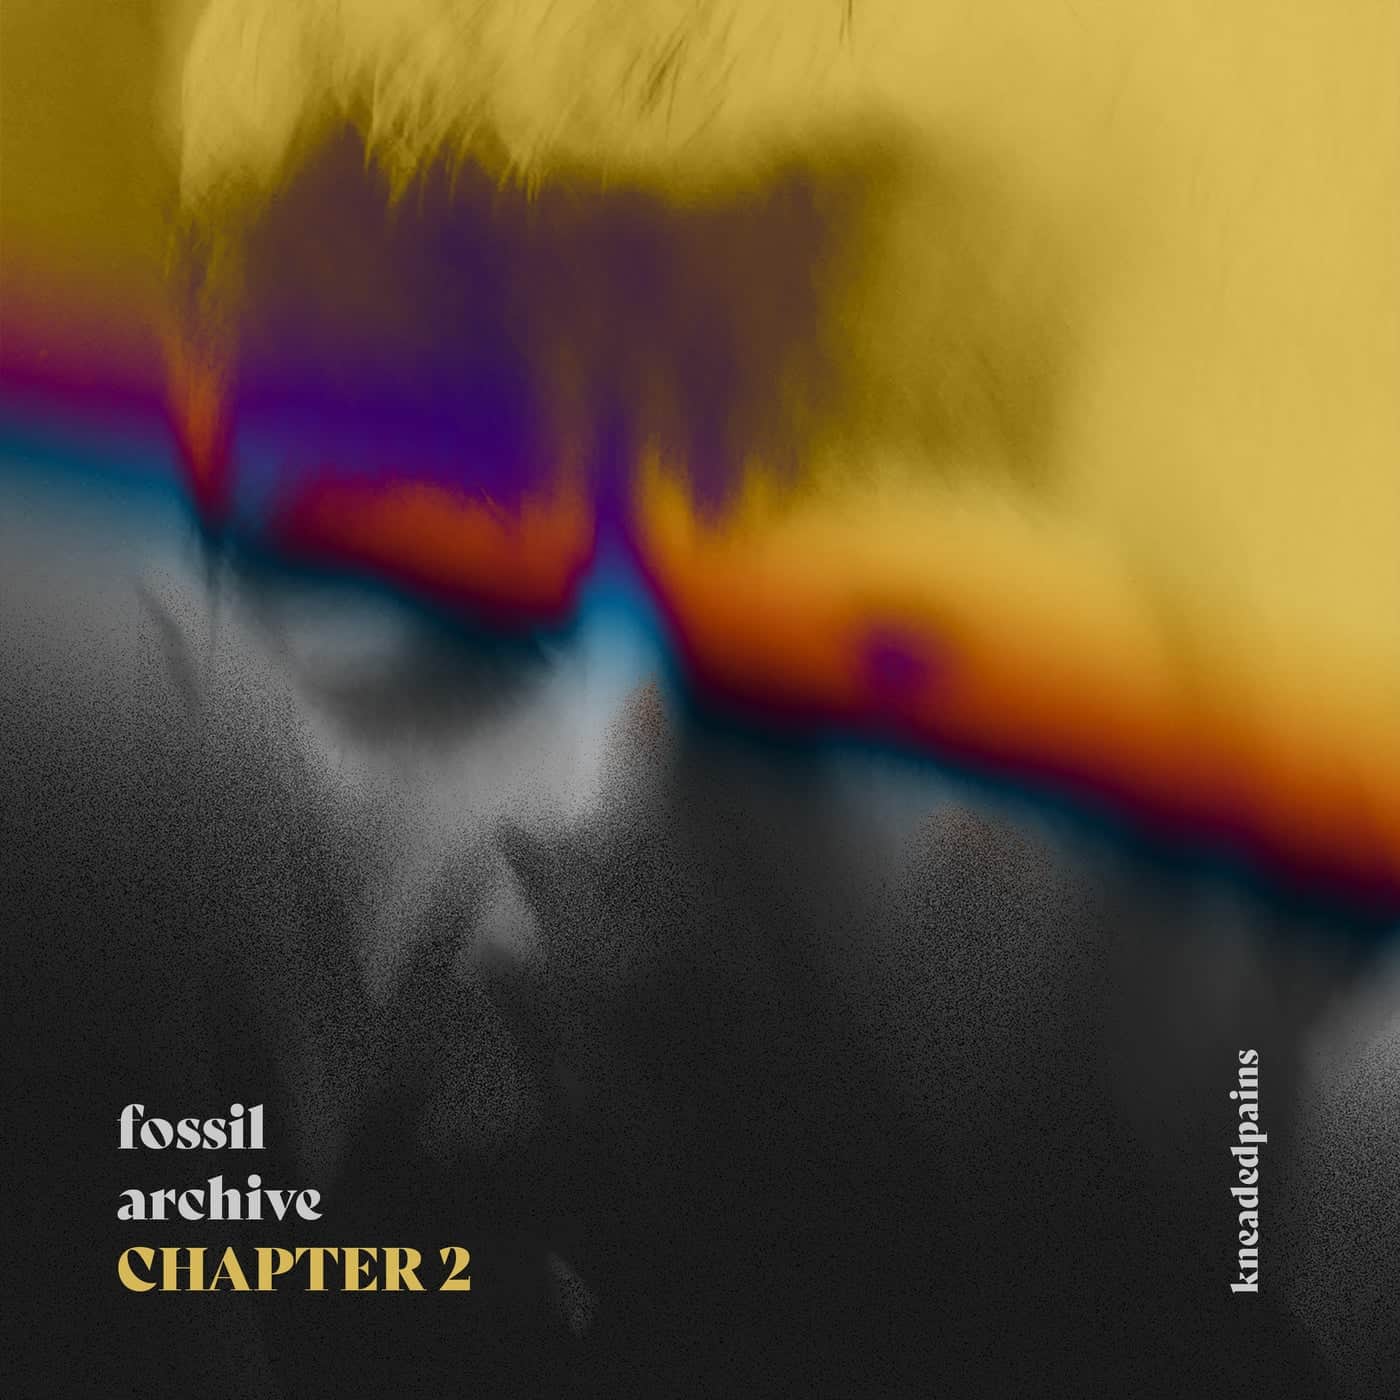 Download Roberto, Fossil Archive - Chapter 2 on Electrobuzz